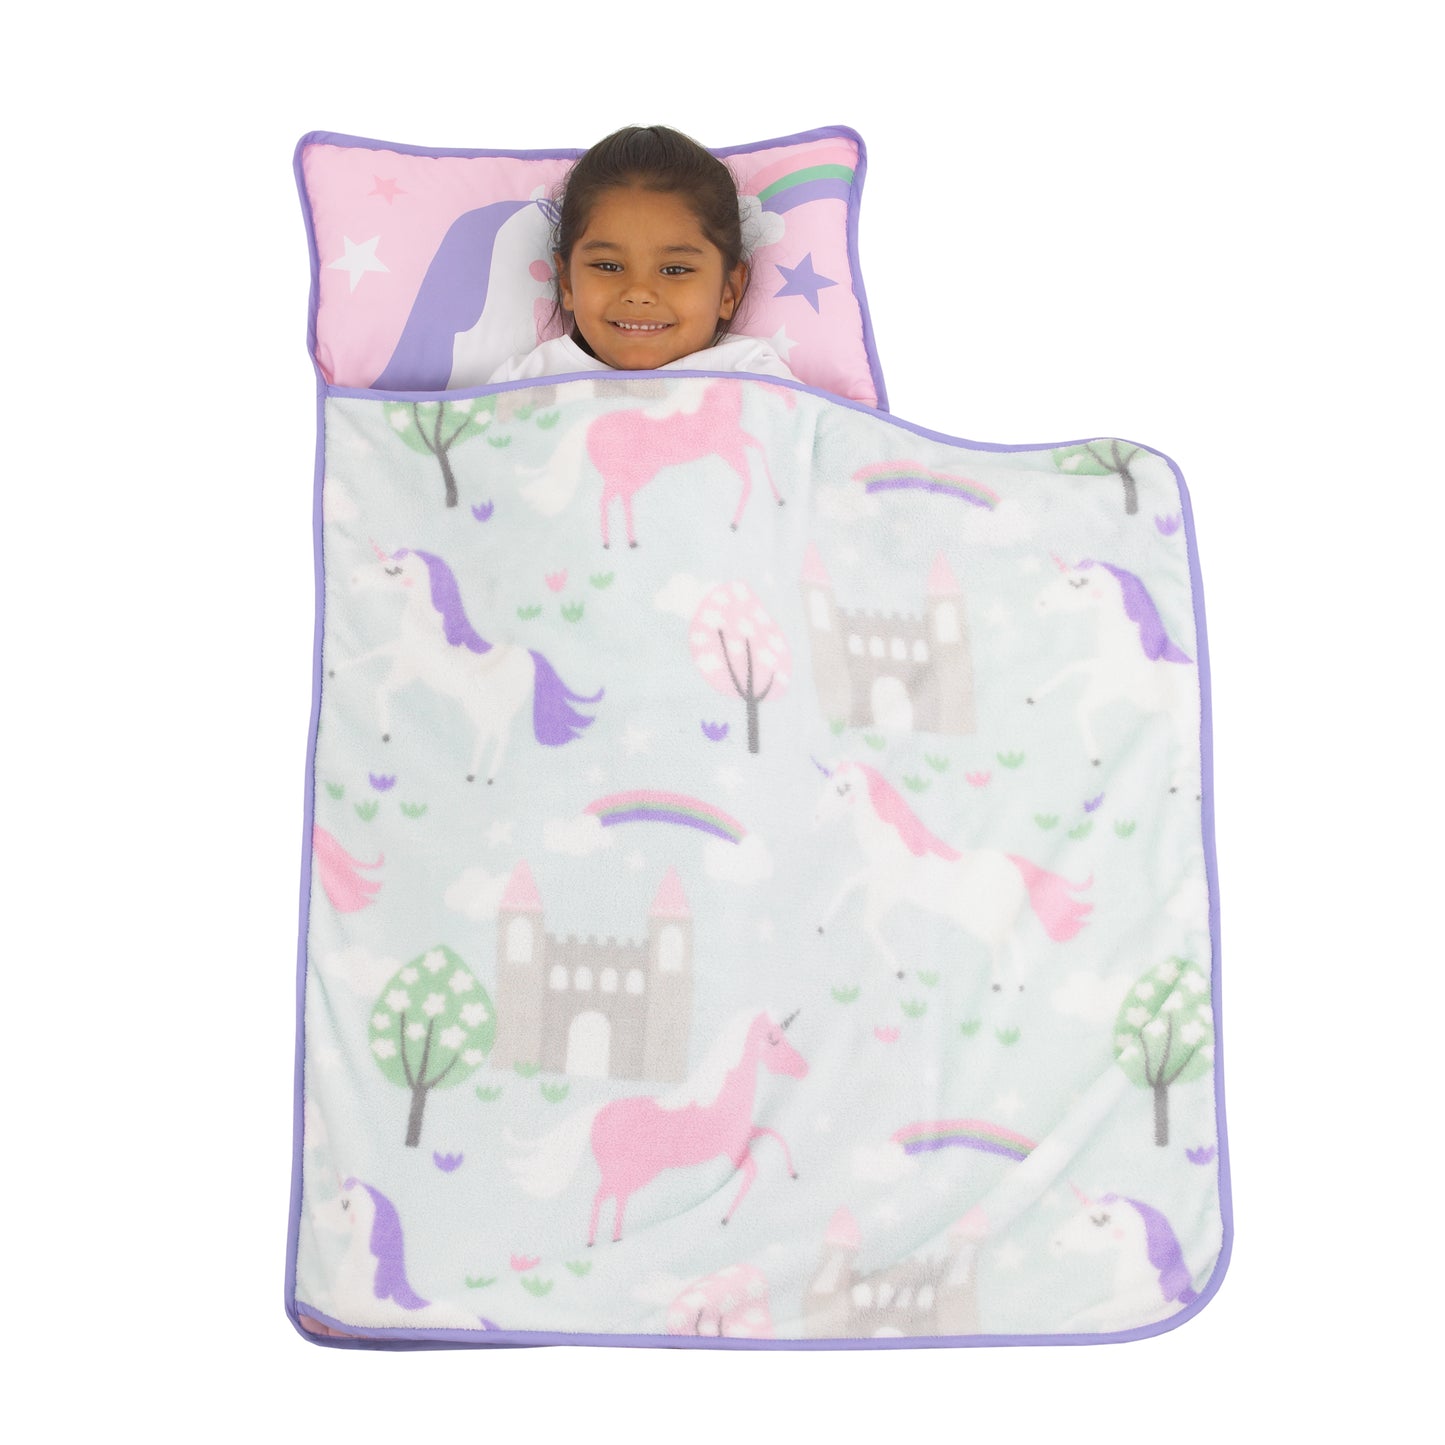 Everything Kids Pink and Aqua Unicorn Toddler Nap Mat with Pillow and Blanket